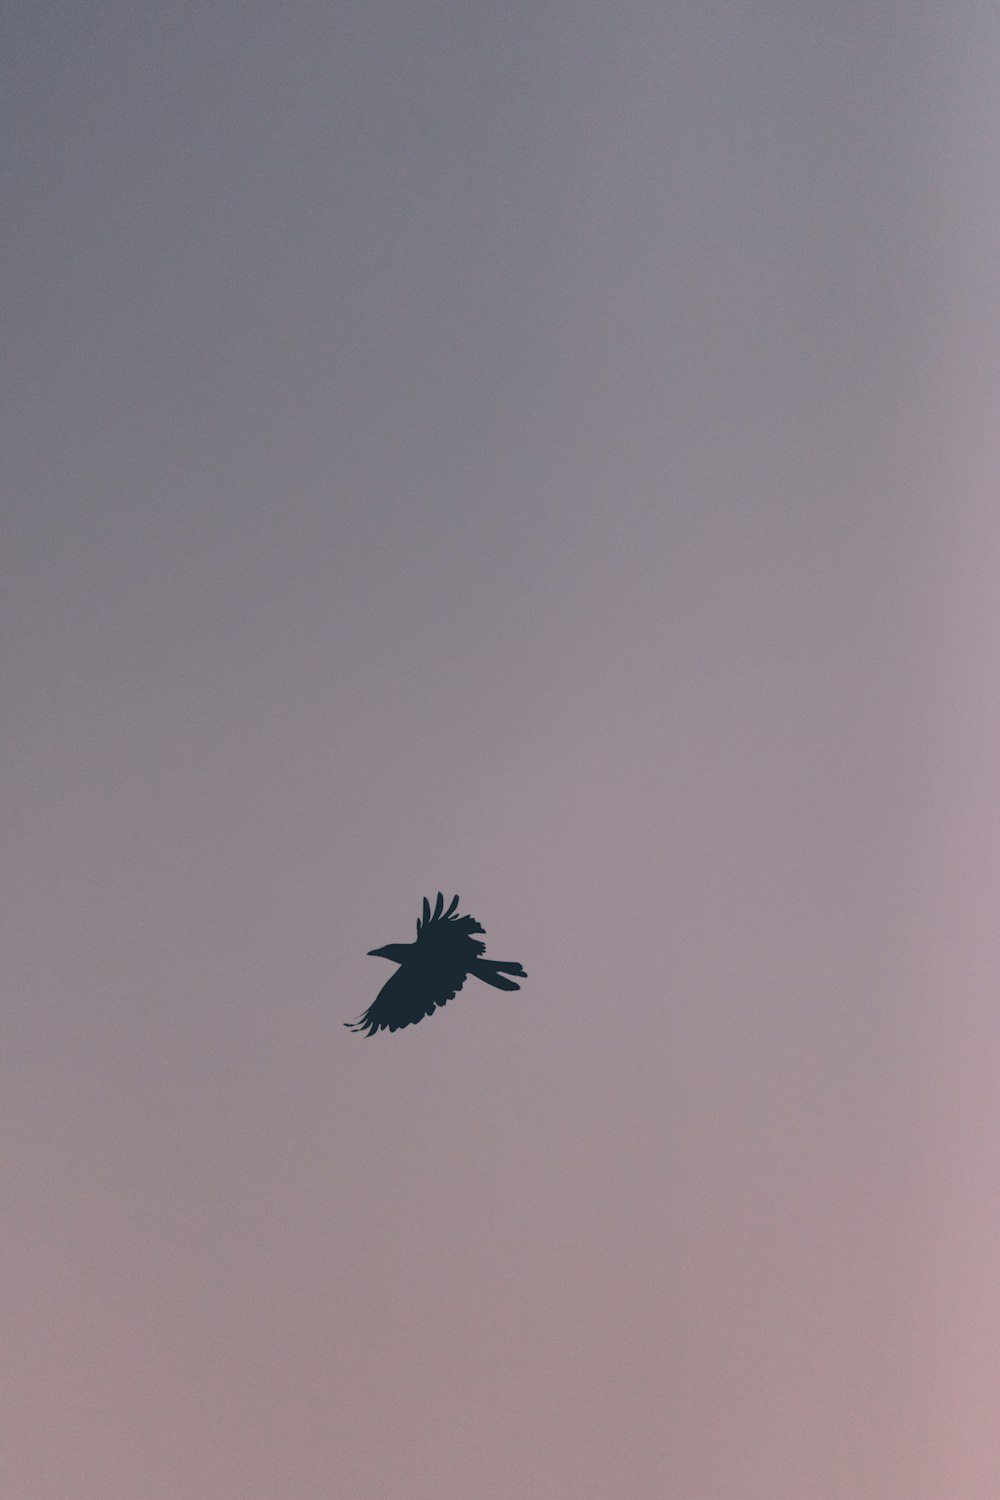 a bird flying in the sky at dusk